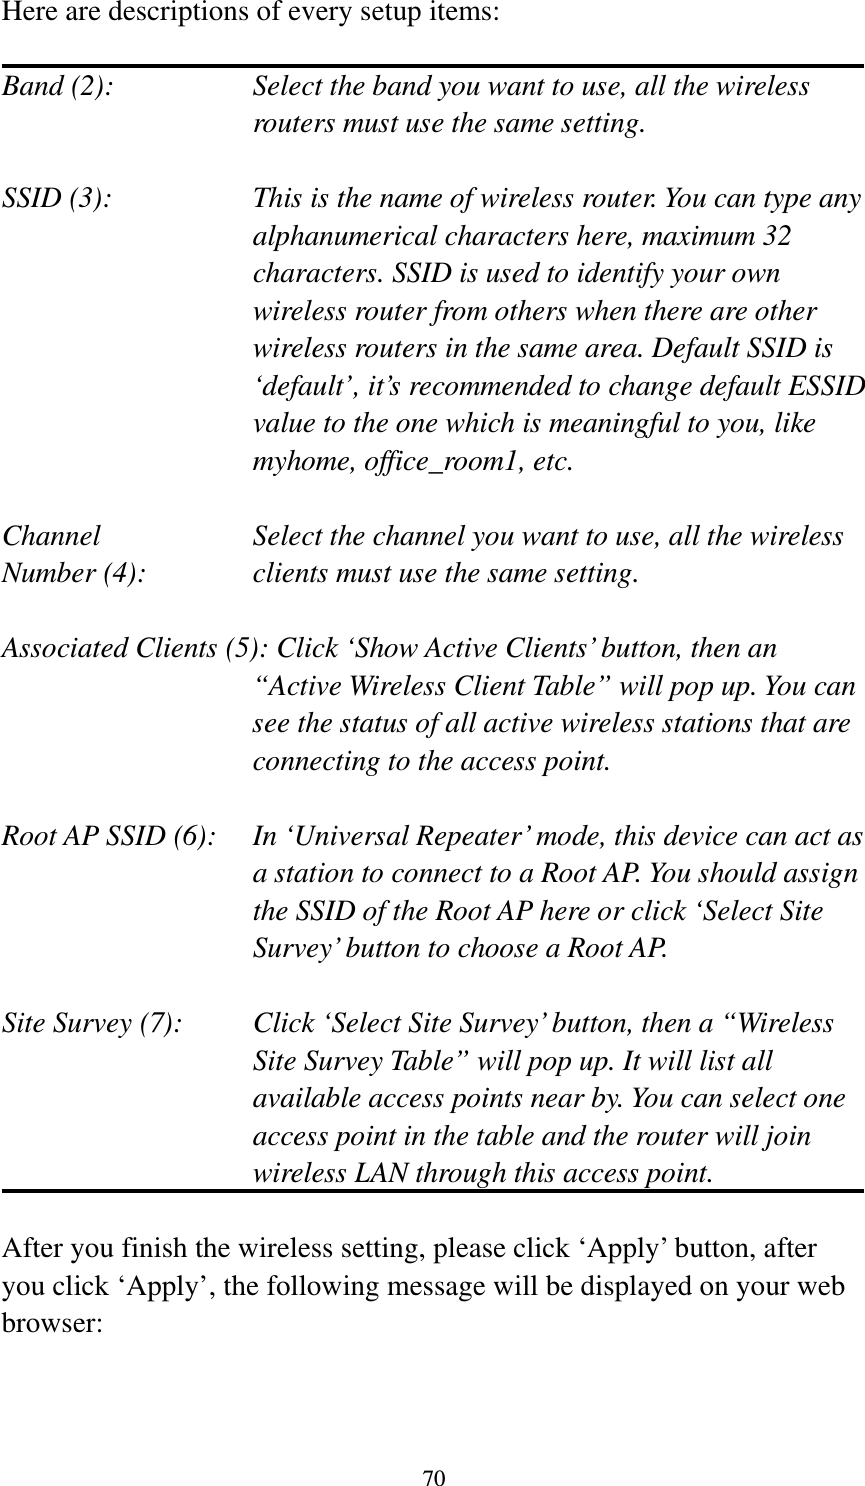 70 Here are descriptions of every setup items:  Band (2):  Select the band you want to use, all the wireless routers must use the same setting.  SSID (3):  This is the name of wireless router. You can type any alphanumerical characters here, maximum 32 characters. SSID is used to identify your own wireless router from others when there are other wireless routers in the same area. Default SSID is ‘default’, it’s recommended to change default ESSID value to the one which is meaningful to you, like myhome, office_room1, etc.  Channel  Select the channel you want to use, all the wireless Number (4):  clients must use the same setting.  Associated Clients (5): Click ‘Show Active Clients’ button, then an “Active Wireless Client Table” will pop up. You can see the status of all active wireless stations that are connecting to the access point.  Root AP SSID (6):  In ‘Universal Repeater’ mode, this device can act as a station to connect to a Root AP. You should assign the SSID of the Root AP here or click ‘Select Site Survey’ button to choose a Root AP.  Site Survey (7):  Click ‘Select Site Survey’ button, then a “Wireless Site Survey Table” will pop up. It will list all available access points near by. You can select one access point in the table and the router will join wireless LAN through this access point.  After you finish the wireless setting, please click ‘Apply’ button, after you click ‘Apply’, the following message will be displayed on your web browser:  